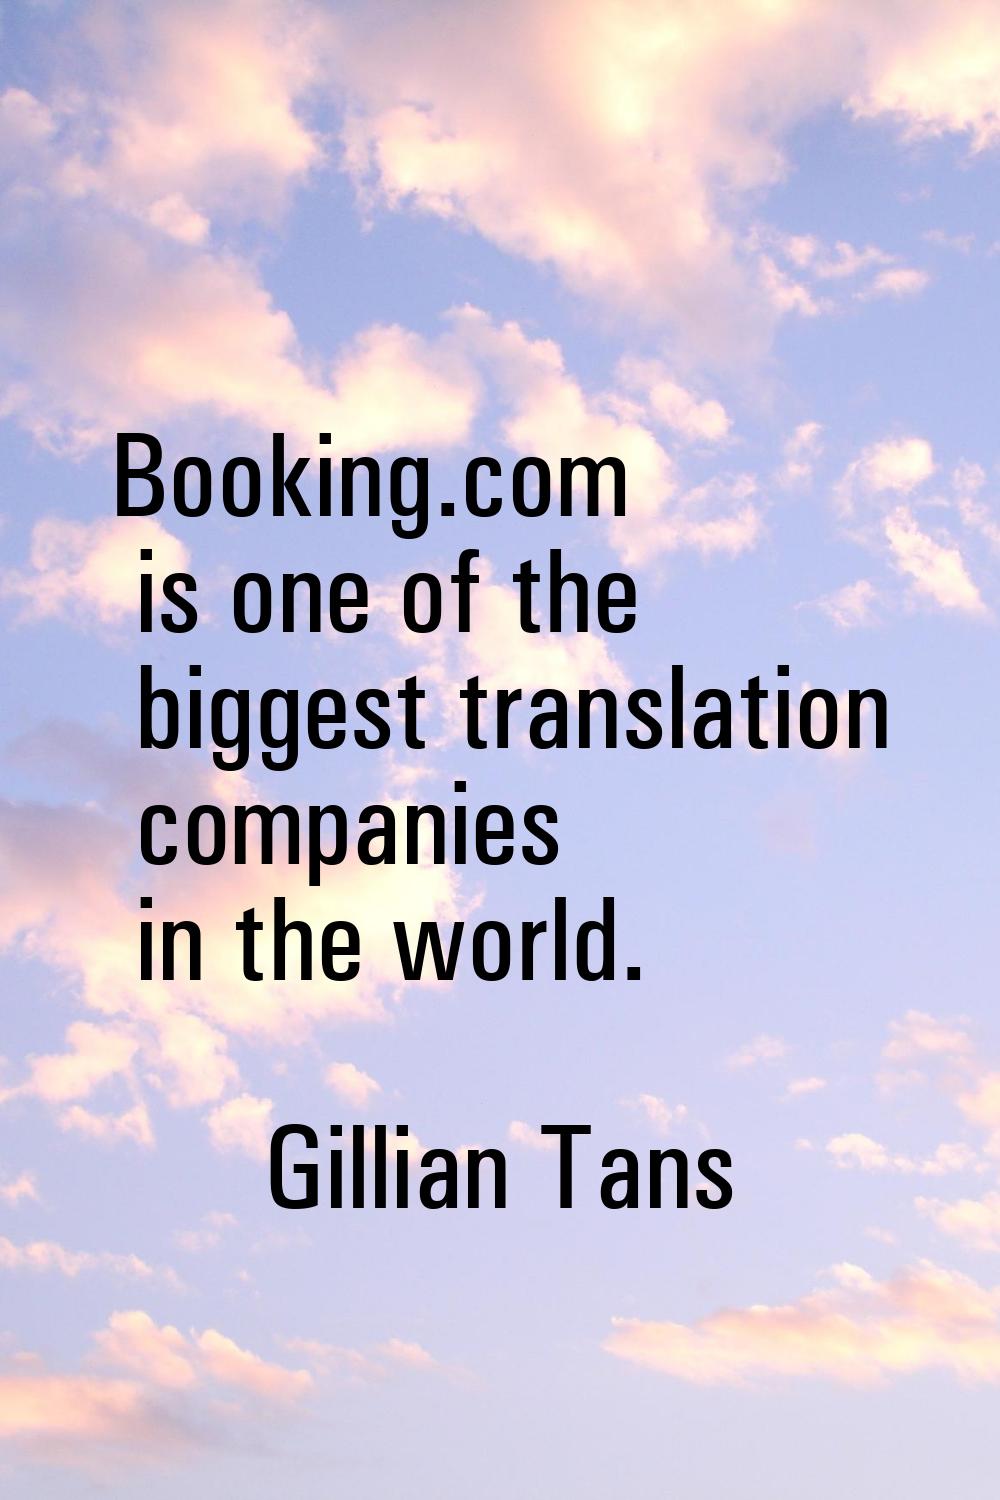 Booking.com is one of the biggest translation companies in the world.